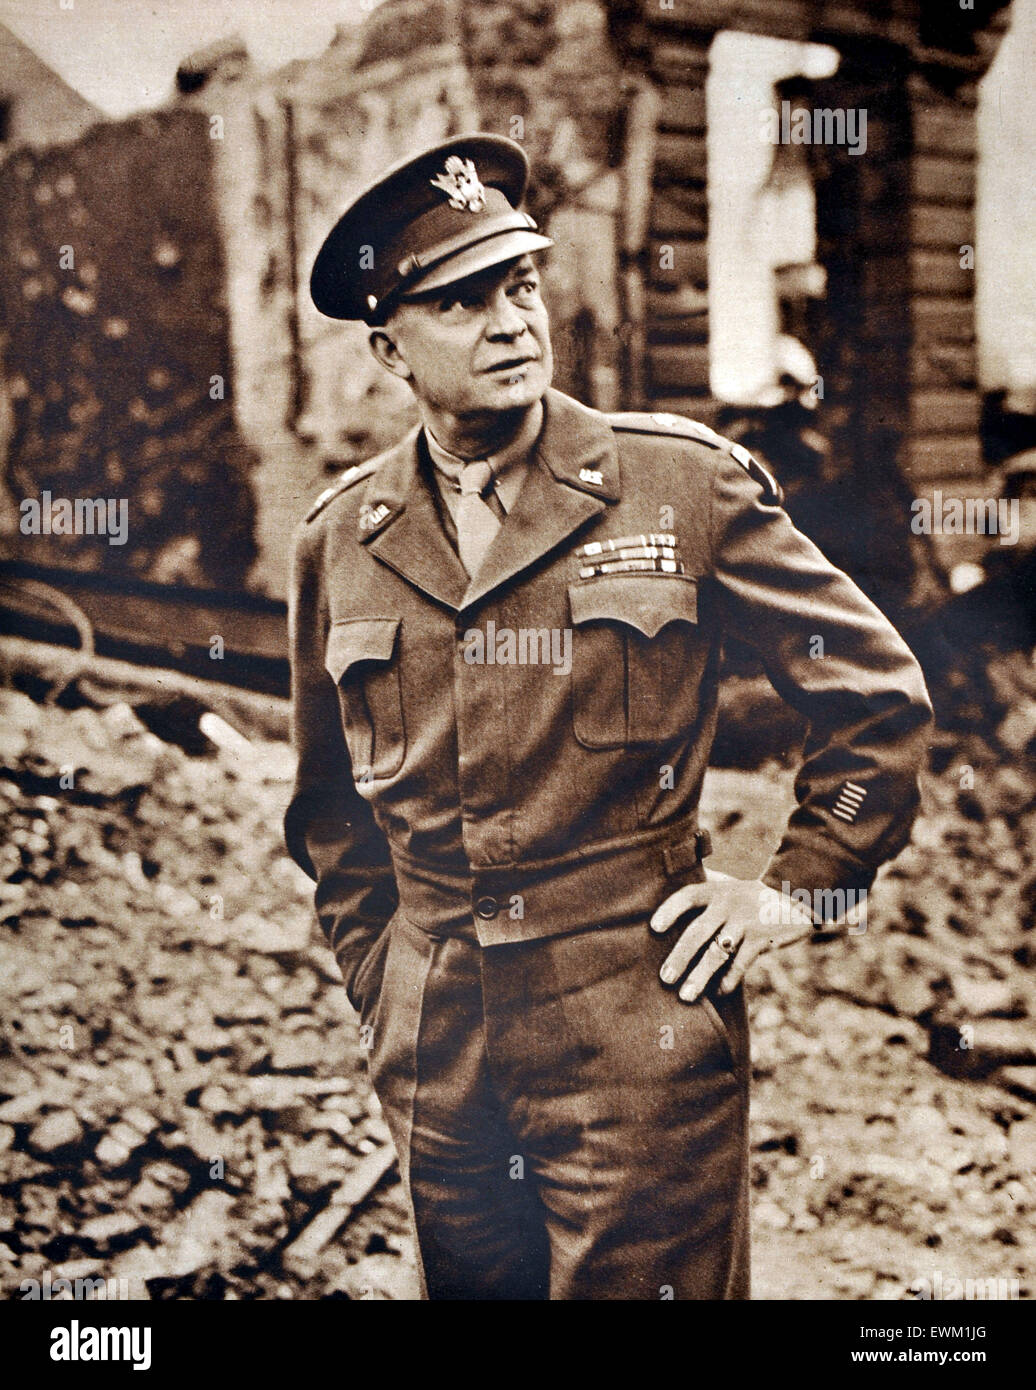 Dwight D. Eisenhower image in bombed out area of London War Illustrated circa 1944. Britain. Dwight David 'Ike' Eisenhower (1890 – 1969) American army general and statesman who served as the 34th president of the United States from 1953 to 1961 Stock Photo